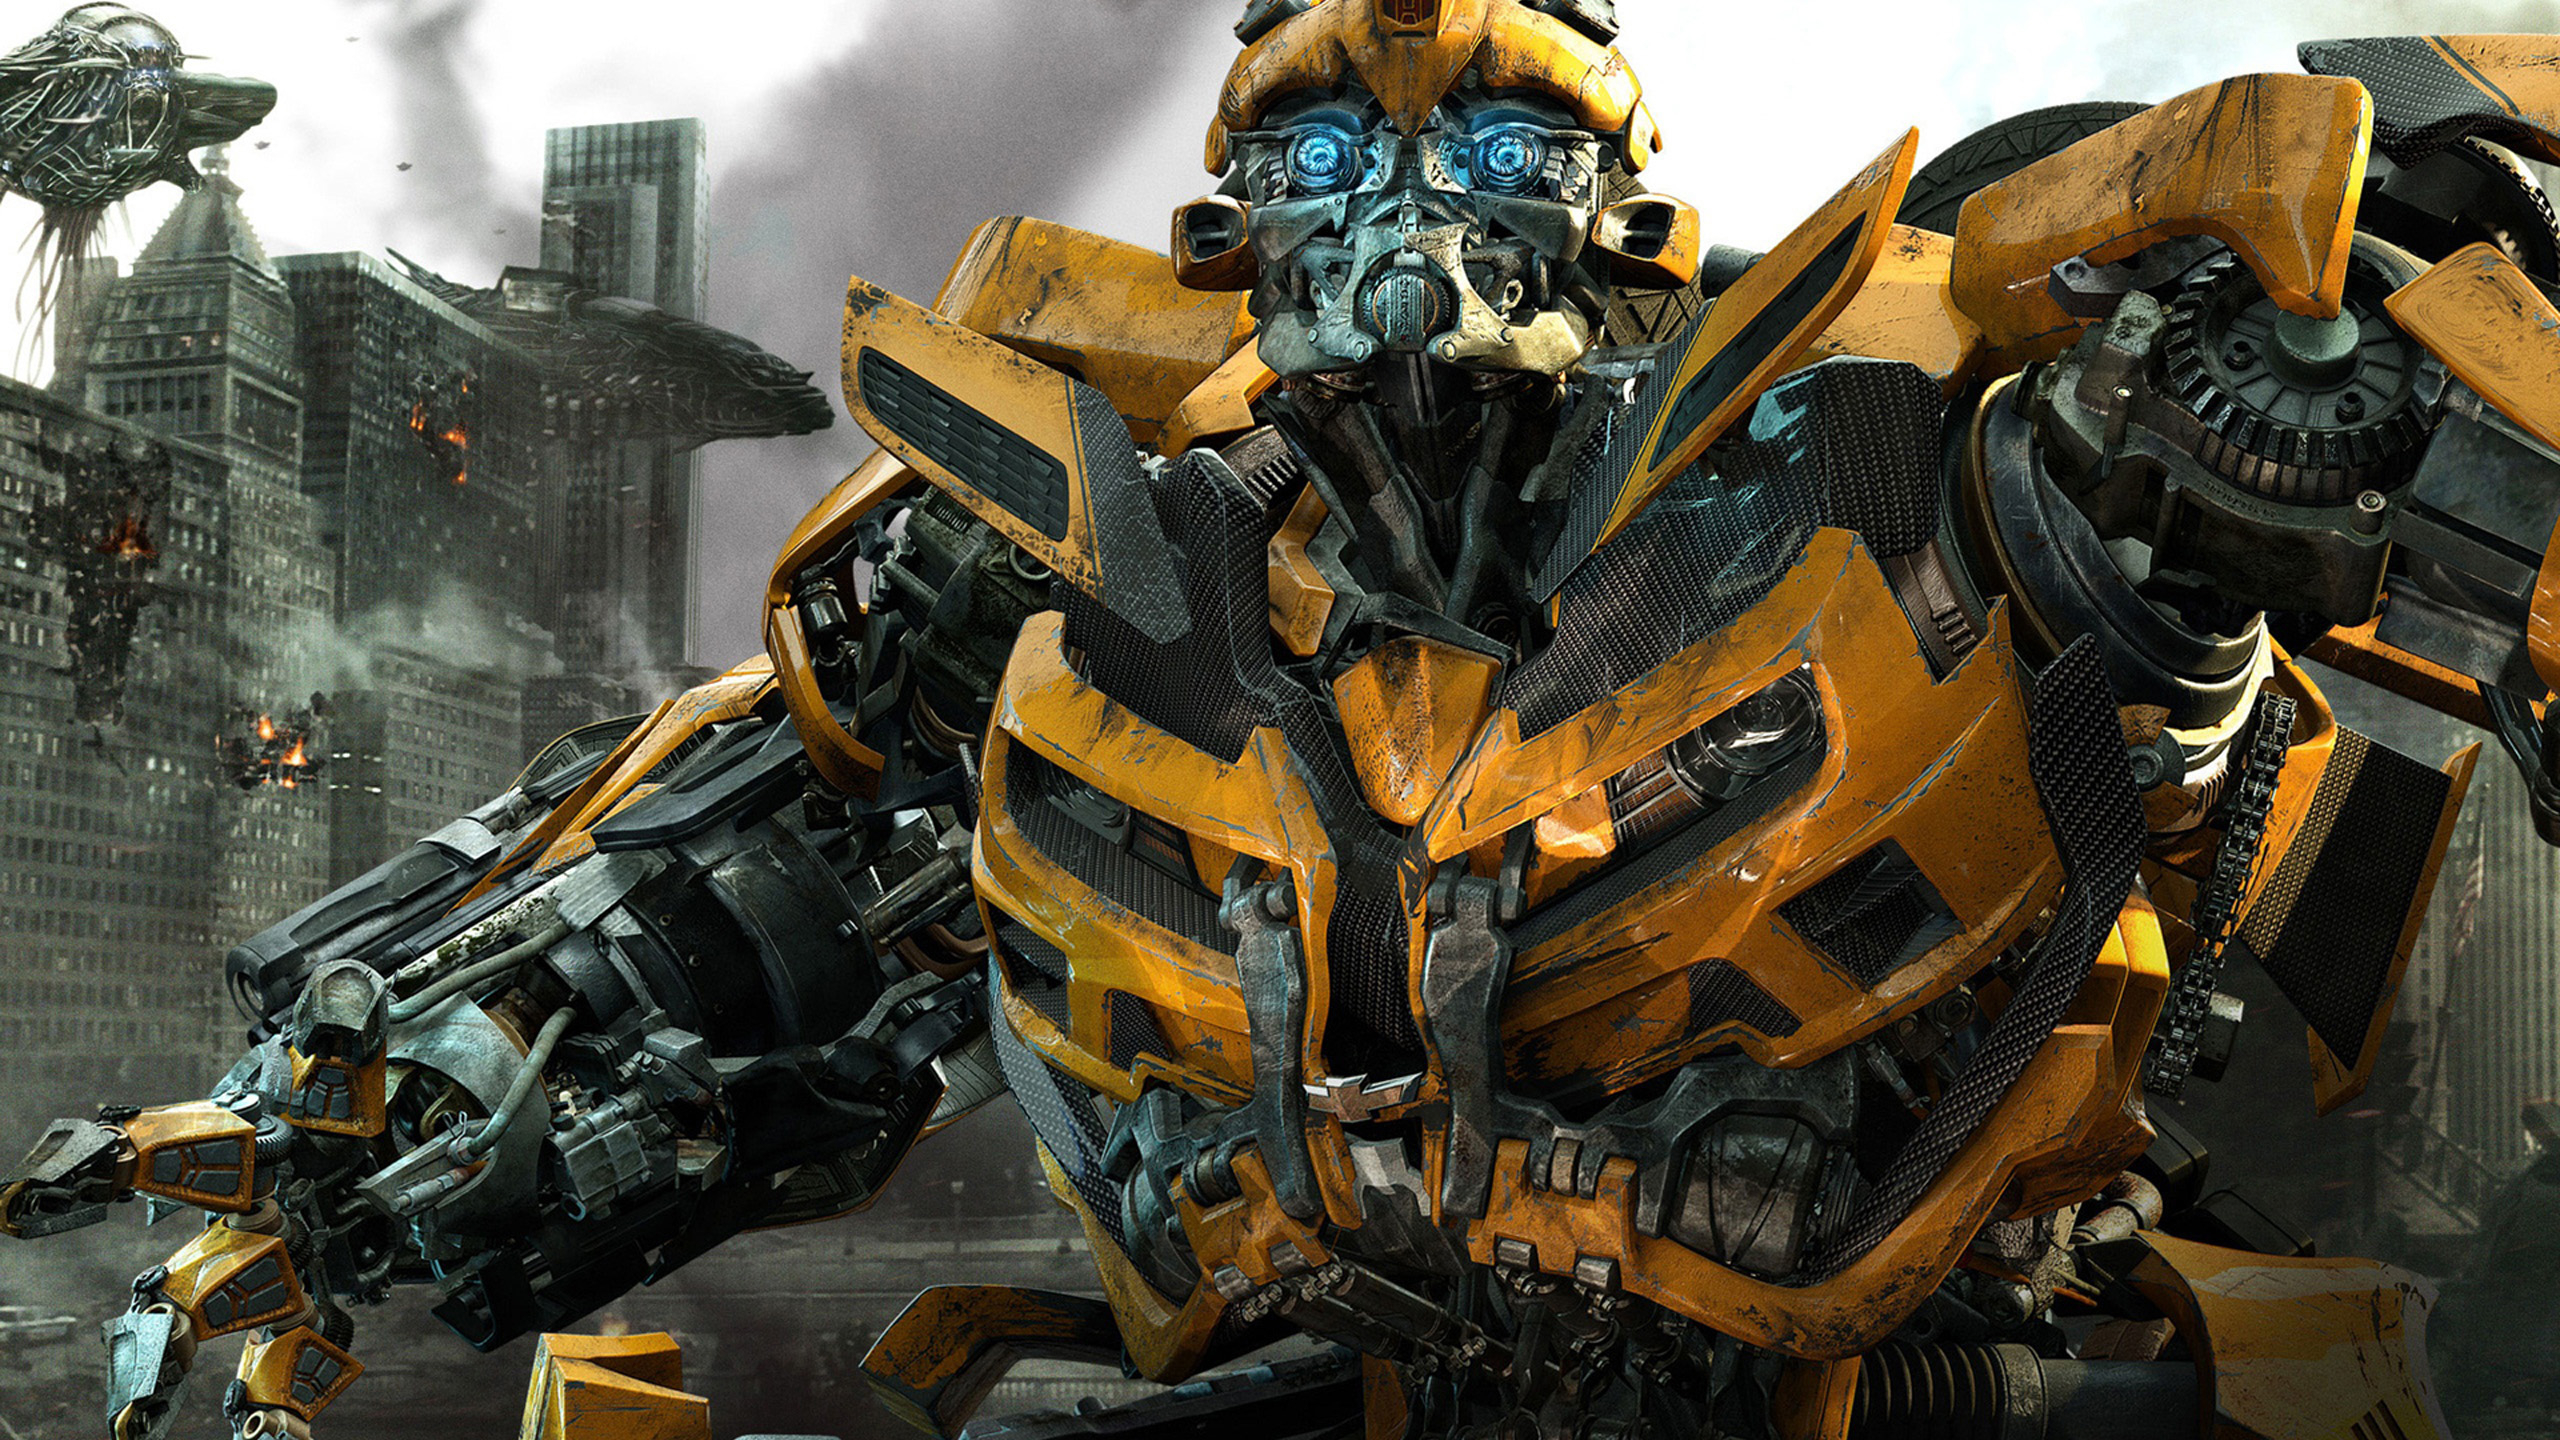 2560x1440 HD Transformers Wallpapers \u0026 Backgrounds For Free Download